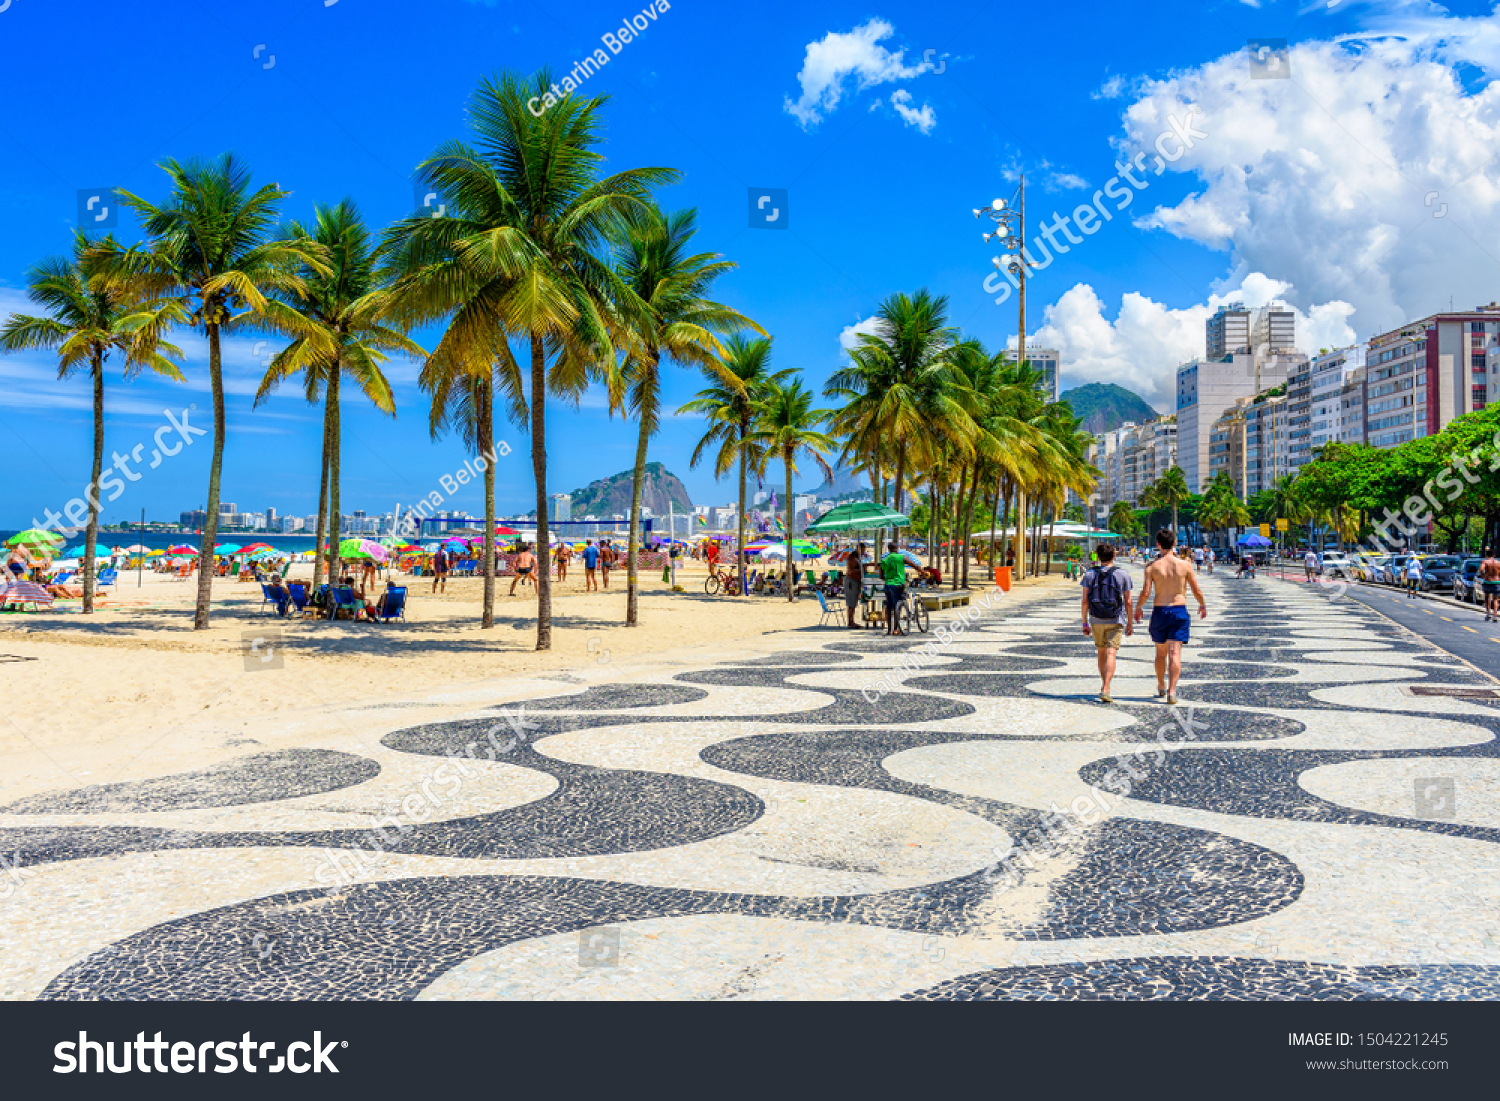 View of Copacabana beach and Leme beach with palms and mosaic of sidewalk in Rio de Janeiro, Brazil. Copacabana beach is the most famous beach of Rio de Janeiro, Brazil. cityscape of Rio de Janeiro #1504221245